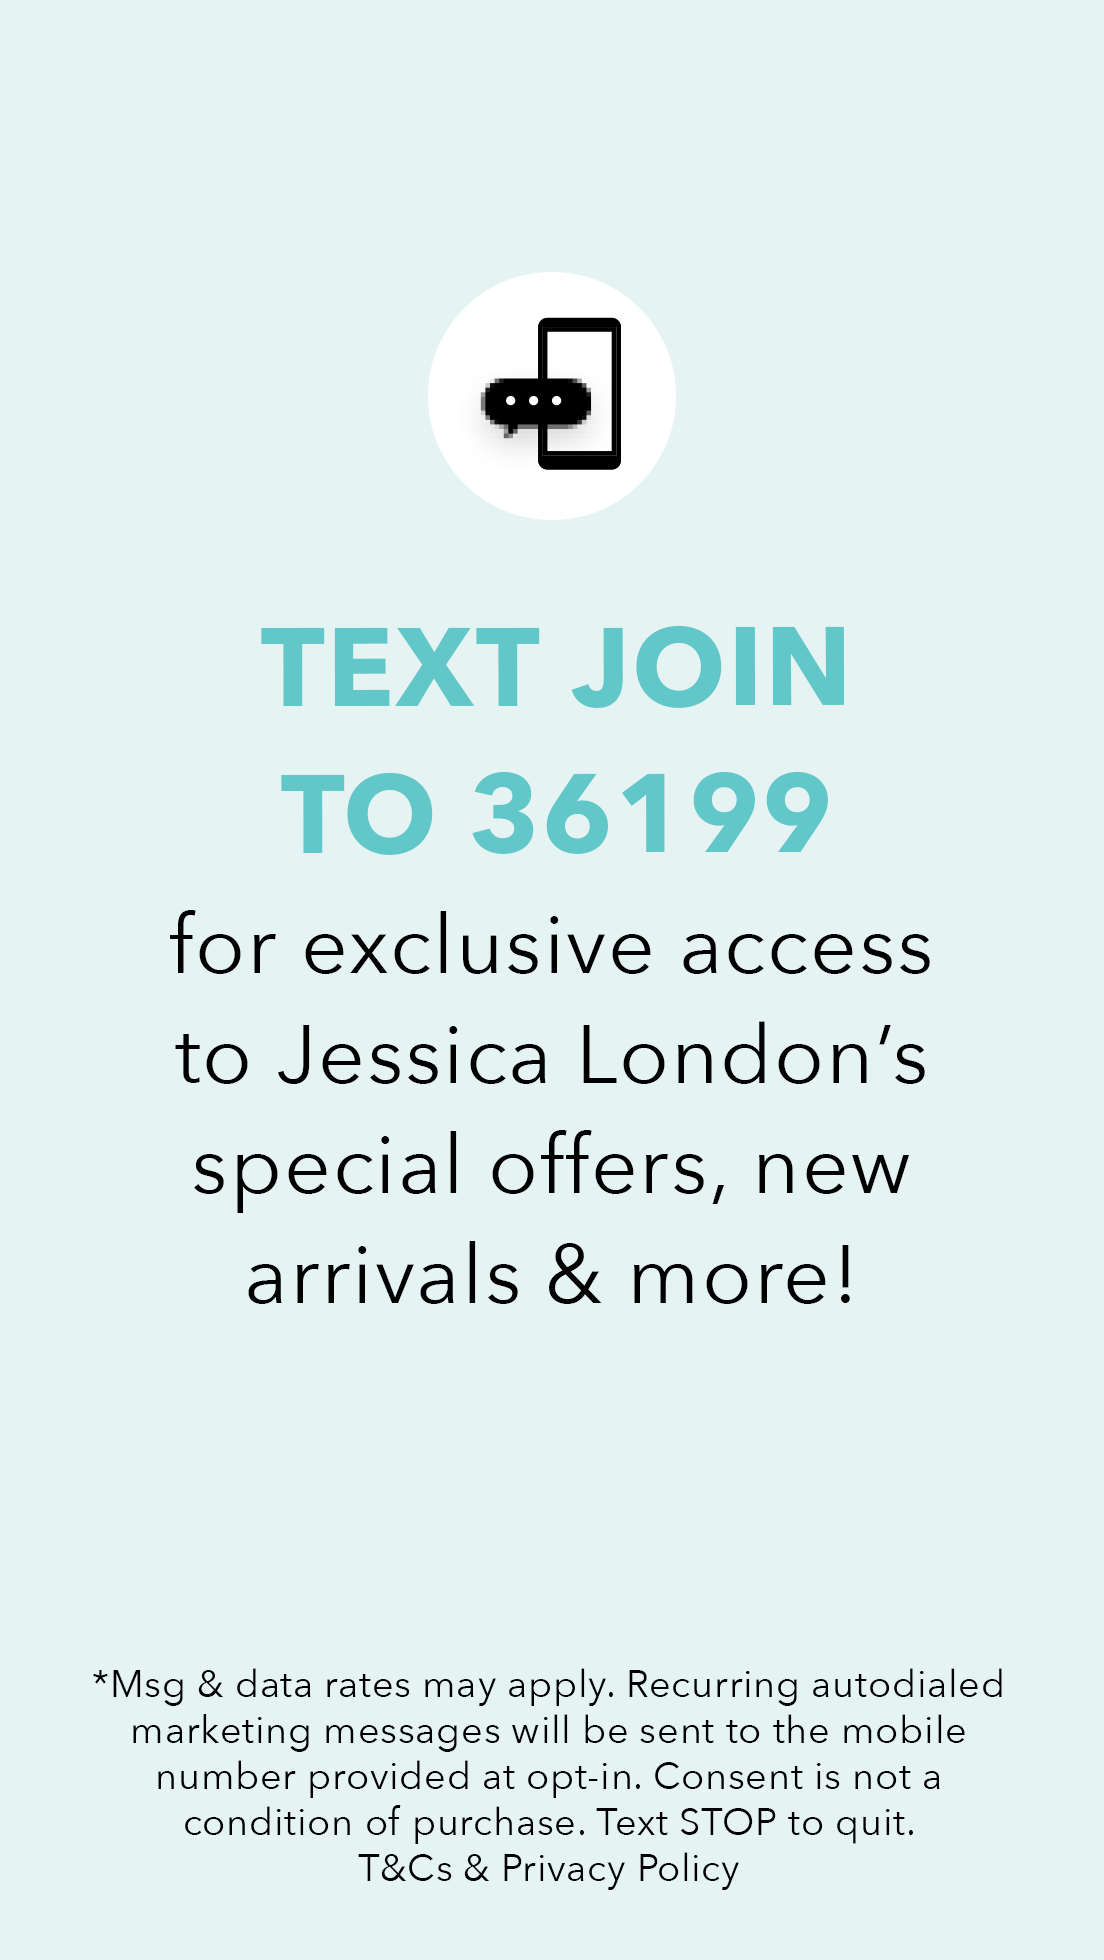 Text JOIN to 36199 for exclusive access to special offers, new arrivals and more!